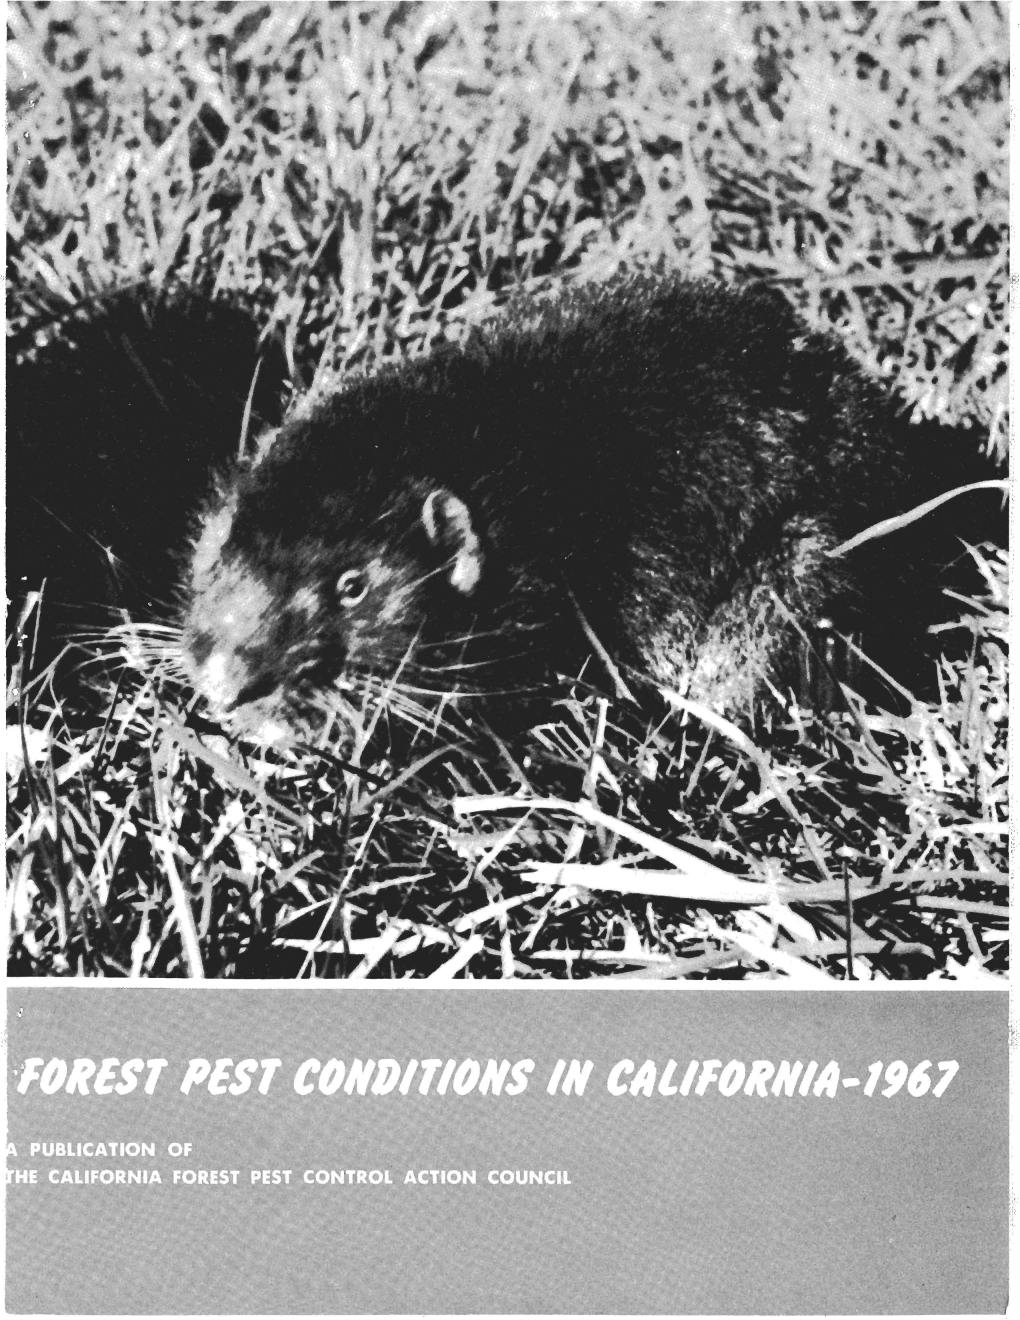 Forest Pest Conditions in California, 1967